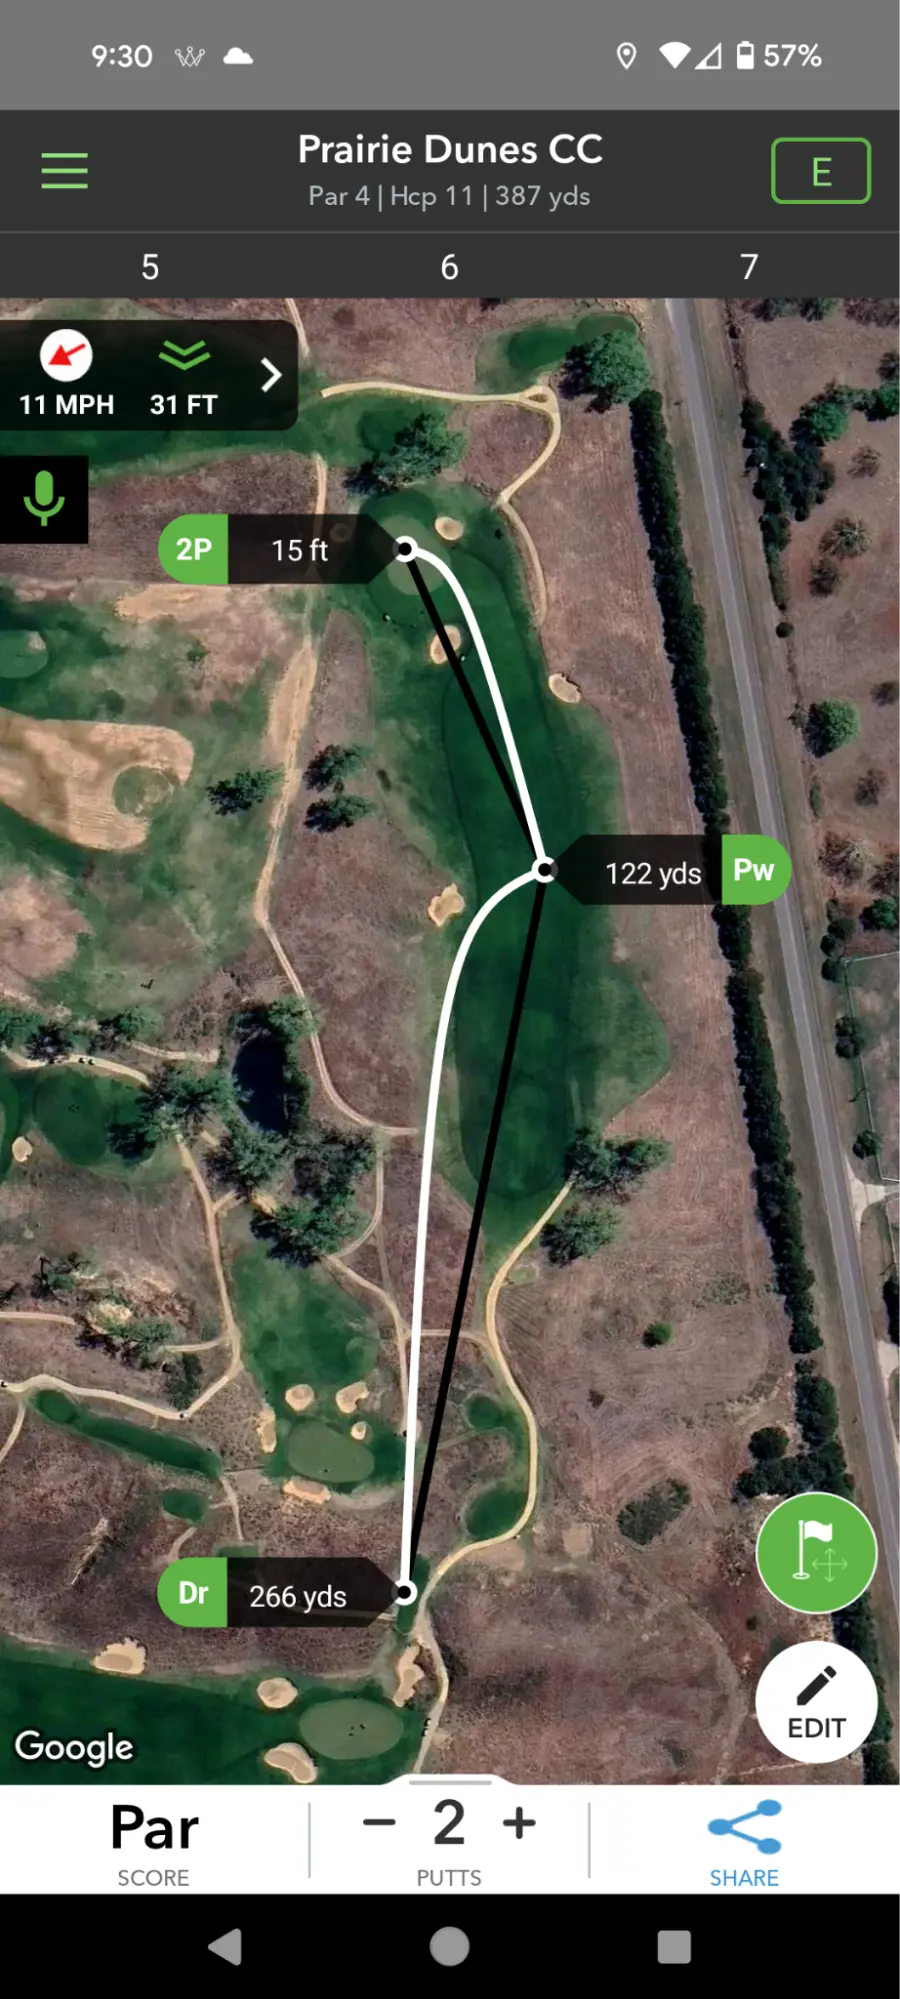 The Arccos app showing a round of golf being played and tracked